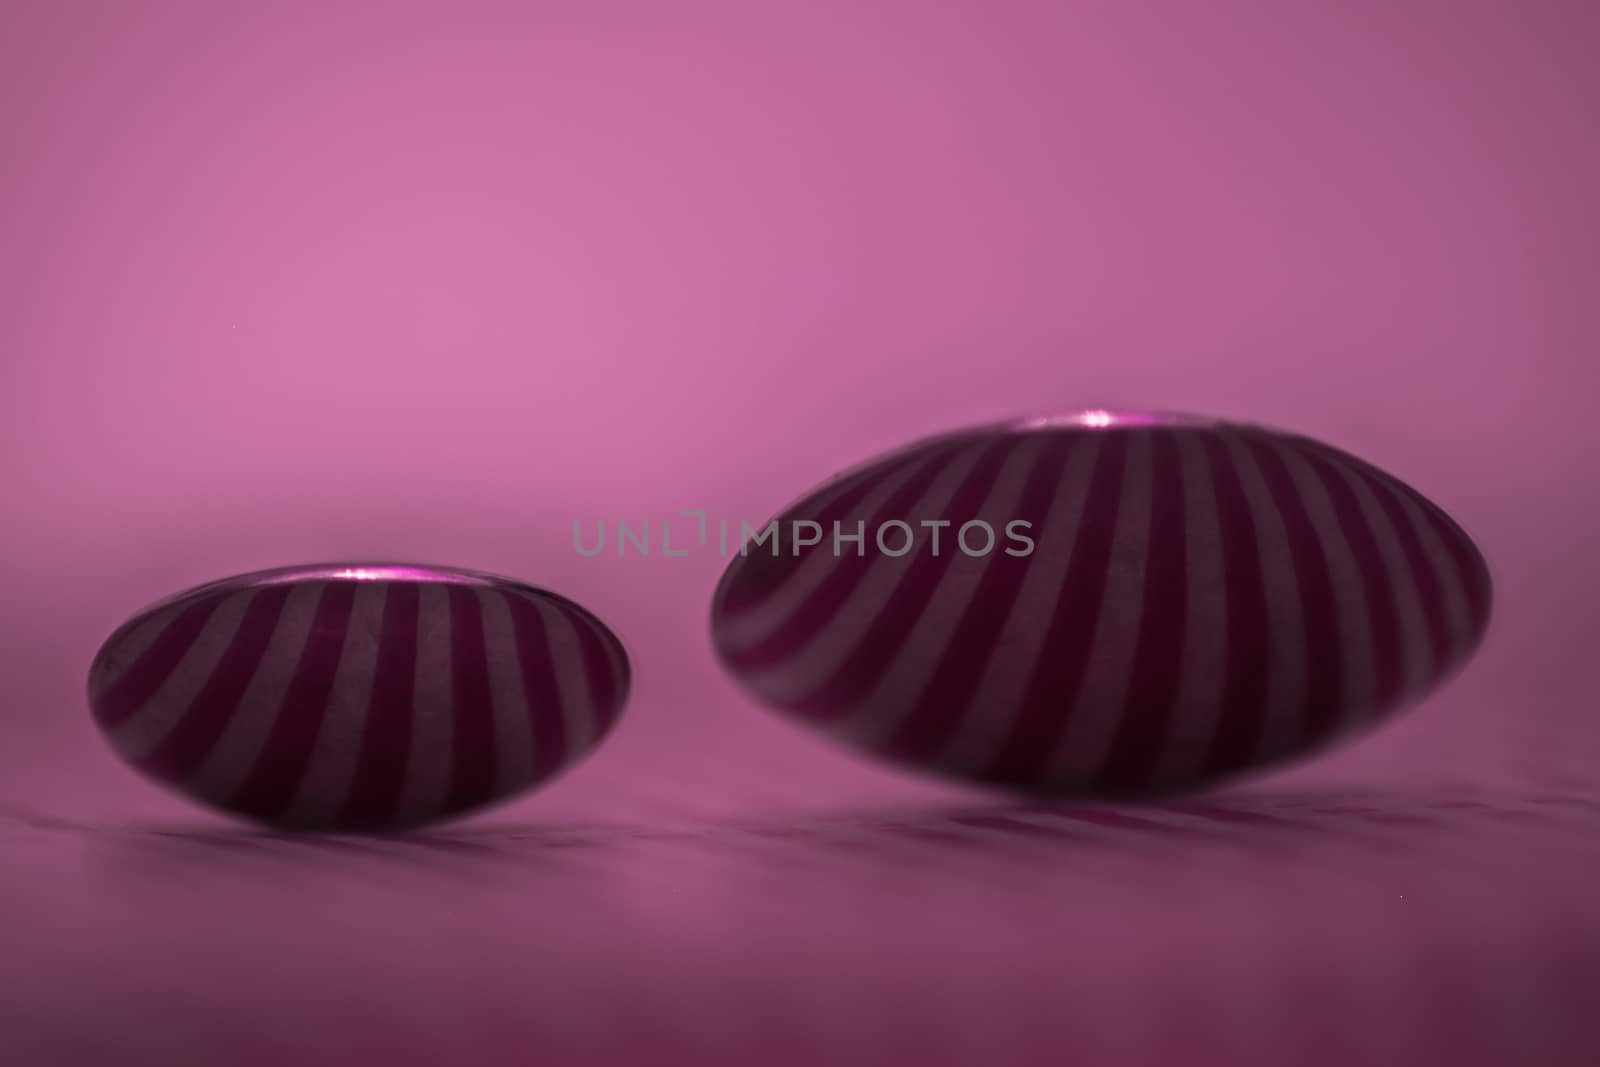 Two spoons composed to reflect vertical lines in pink